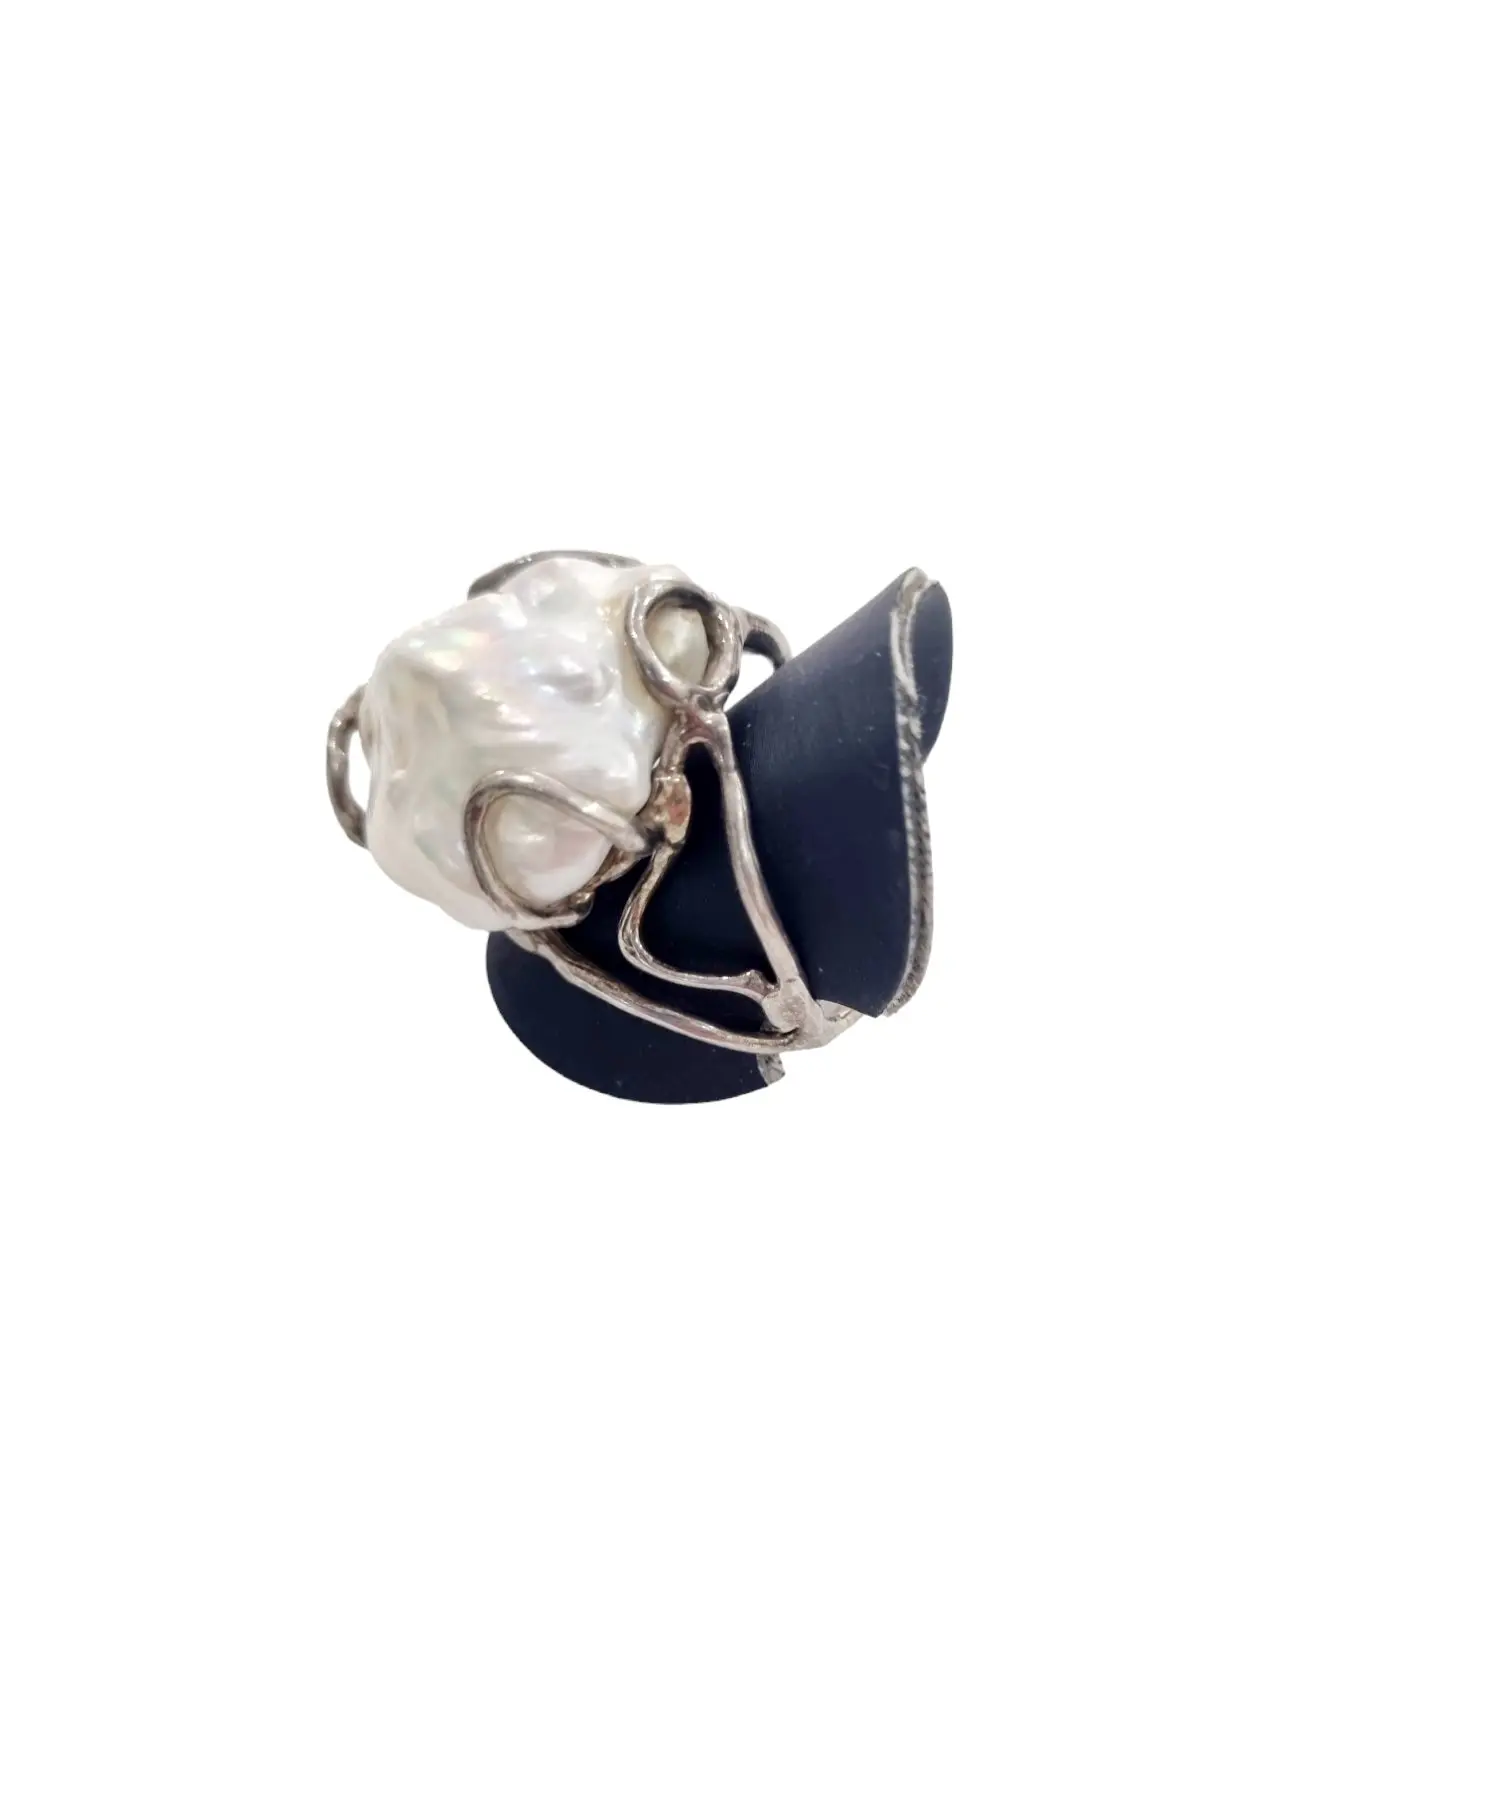 Adjustable ring made with scaramazza pearl and 925 silver workmanship